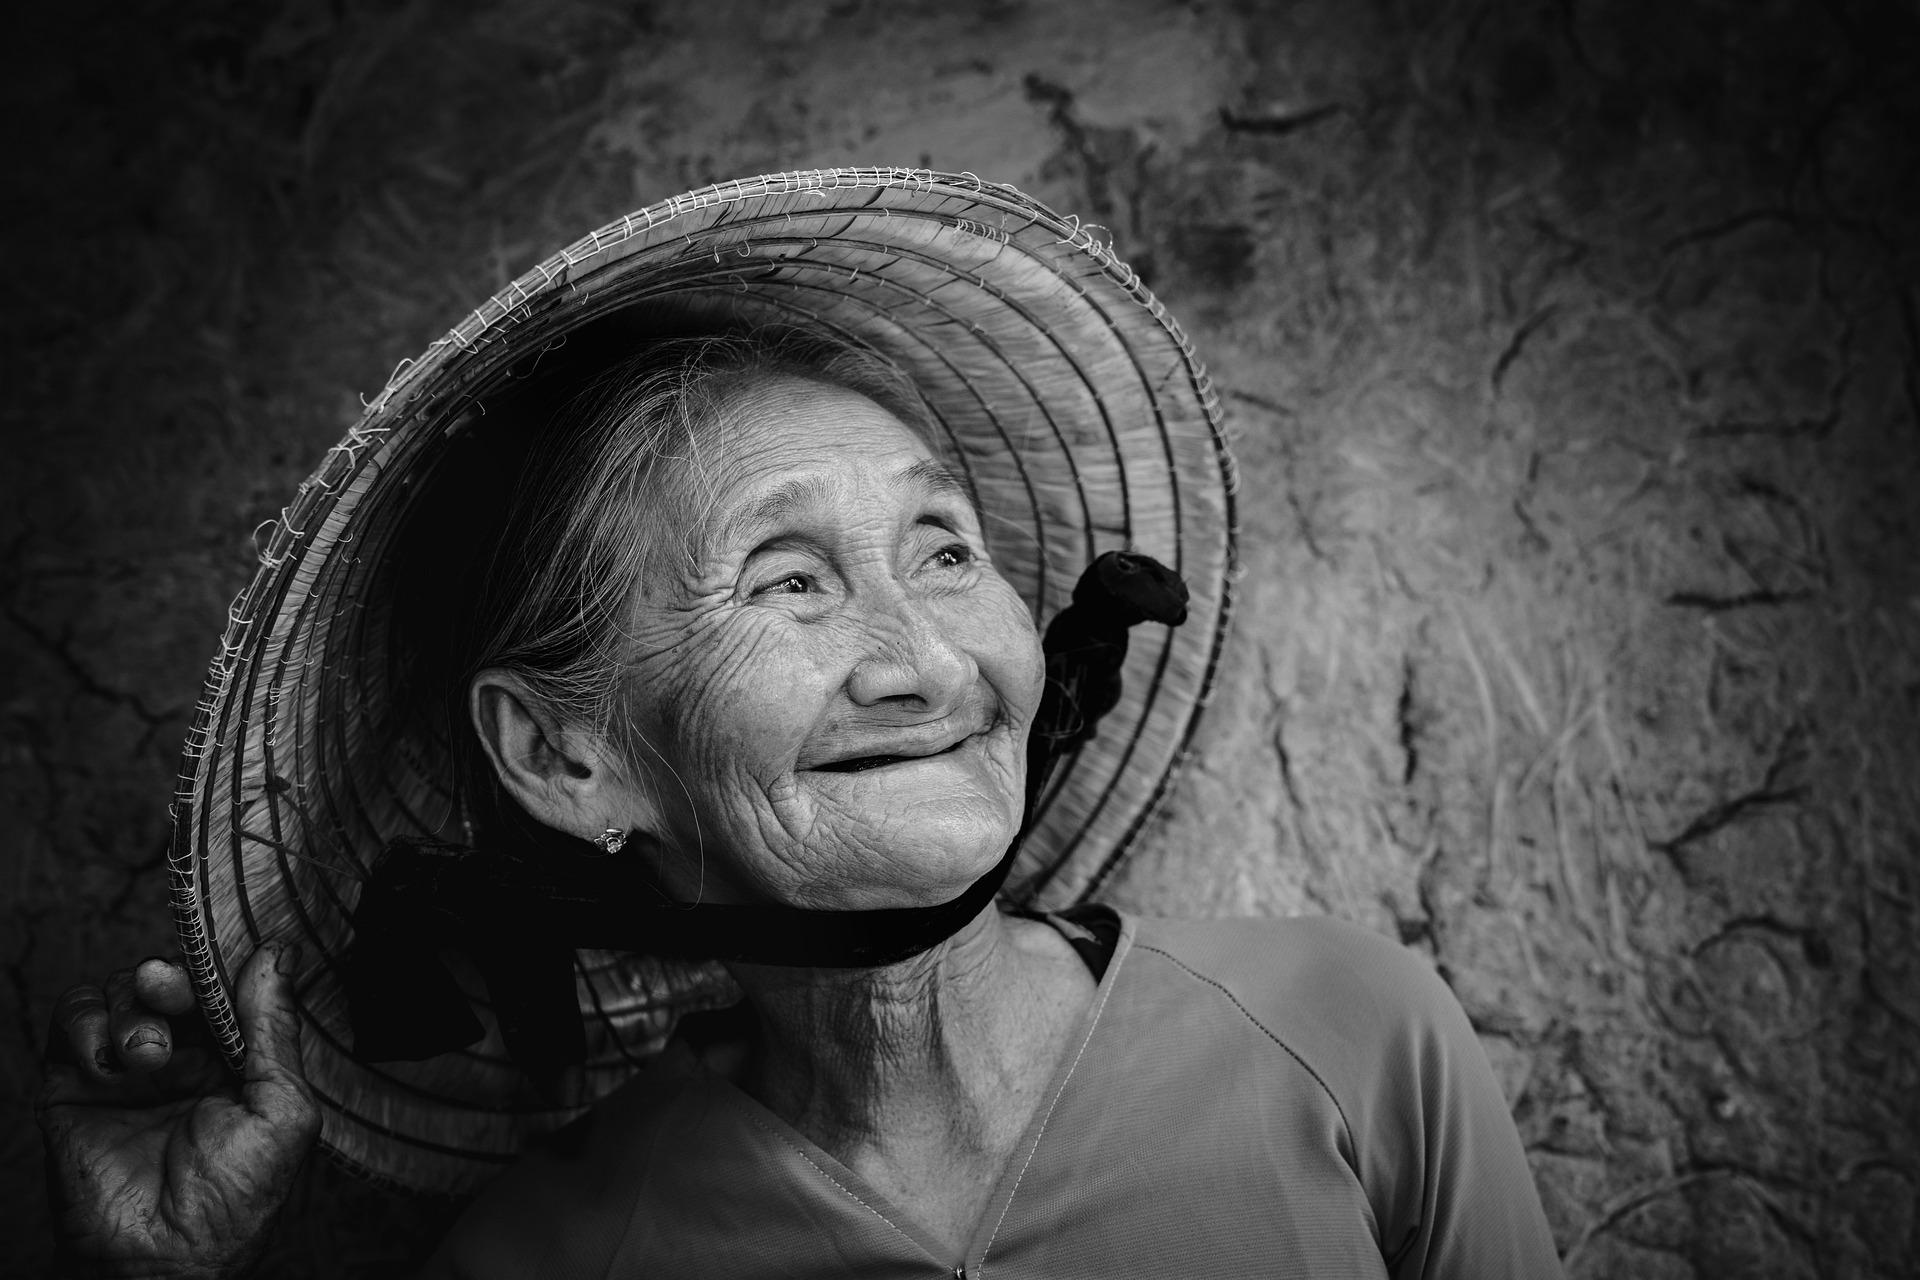 The Zen masters old mother always had a pleasant smile